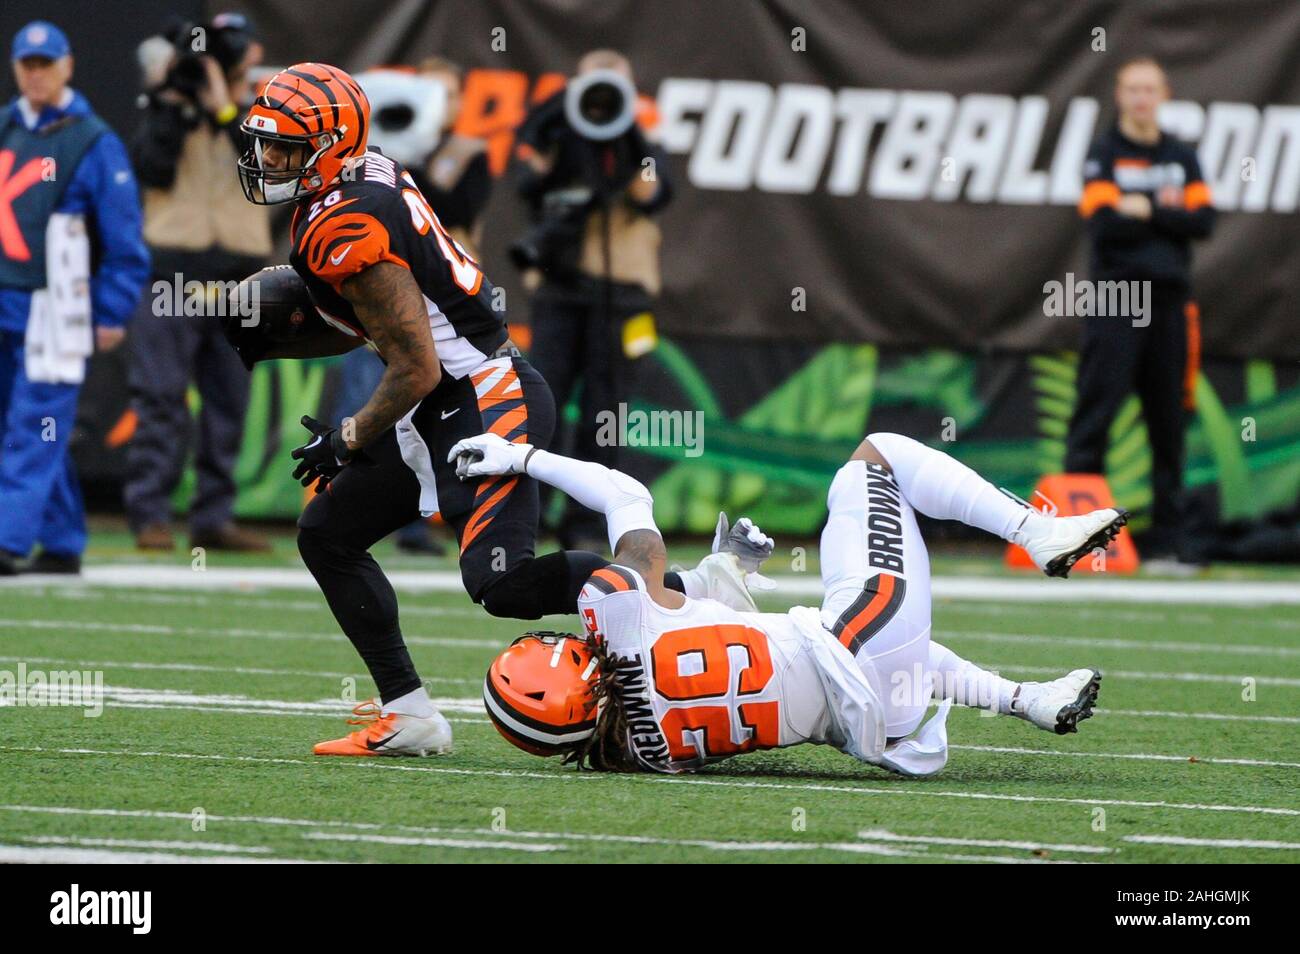 Cincinnati, OH, USA. 29th Dec, 2019. Greg Mabin (26) of the Cincinnati Bengals and Sheldrick Redwine (29) of the Cleveland Browns during a game between the Cleveland Browns and the Cincinnati Bengals at Paul Brown Stadium on December 29, 2019 in Cincinnati, OH. Dorn Byg/CSM/Alamy Live News Stock Photo